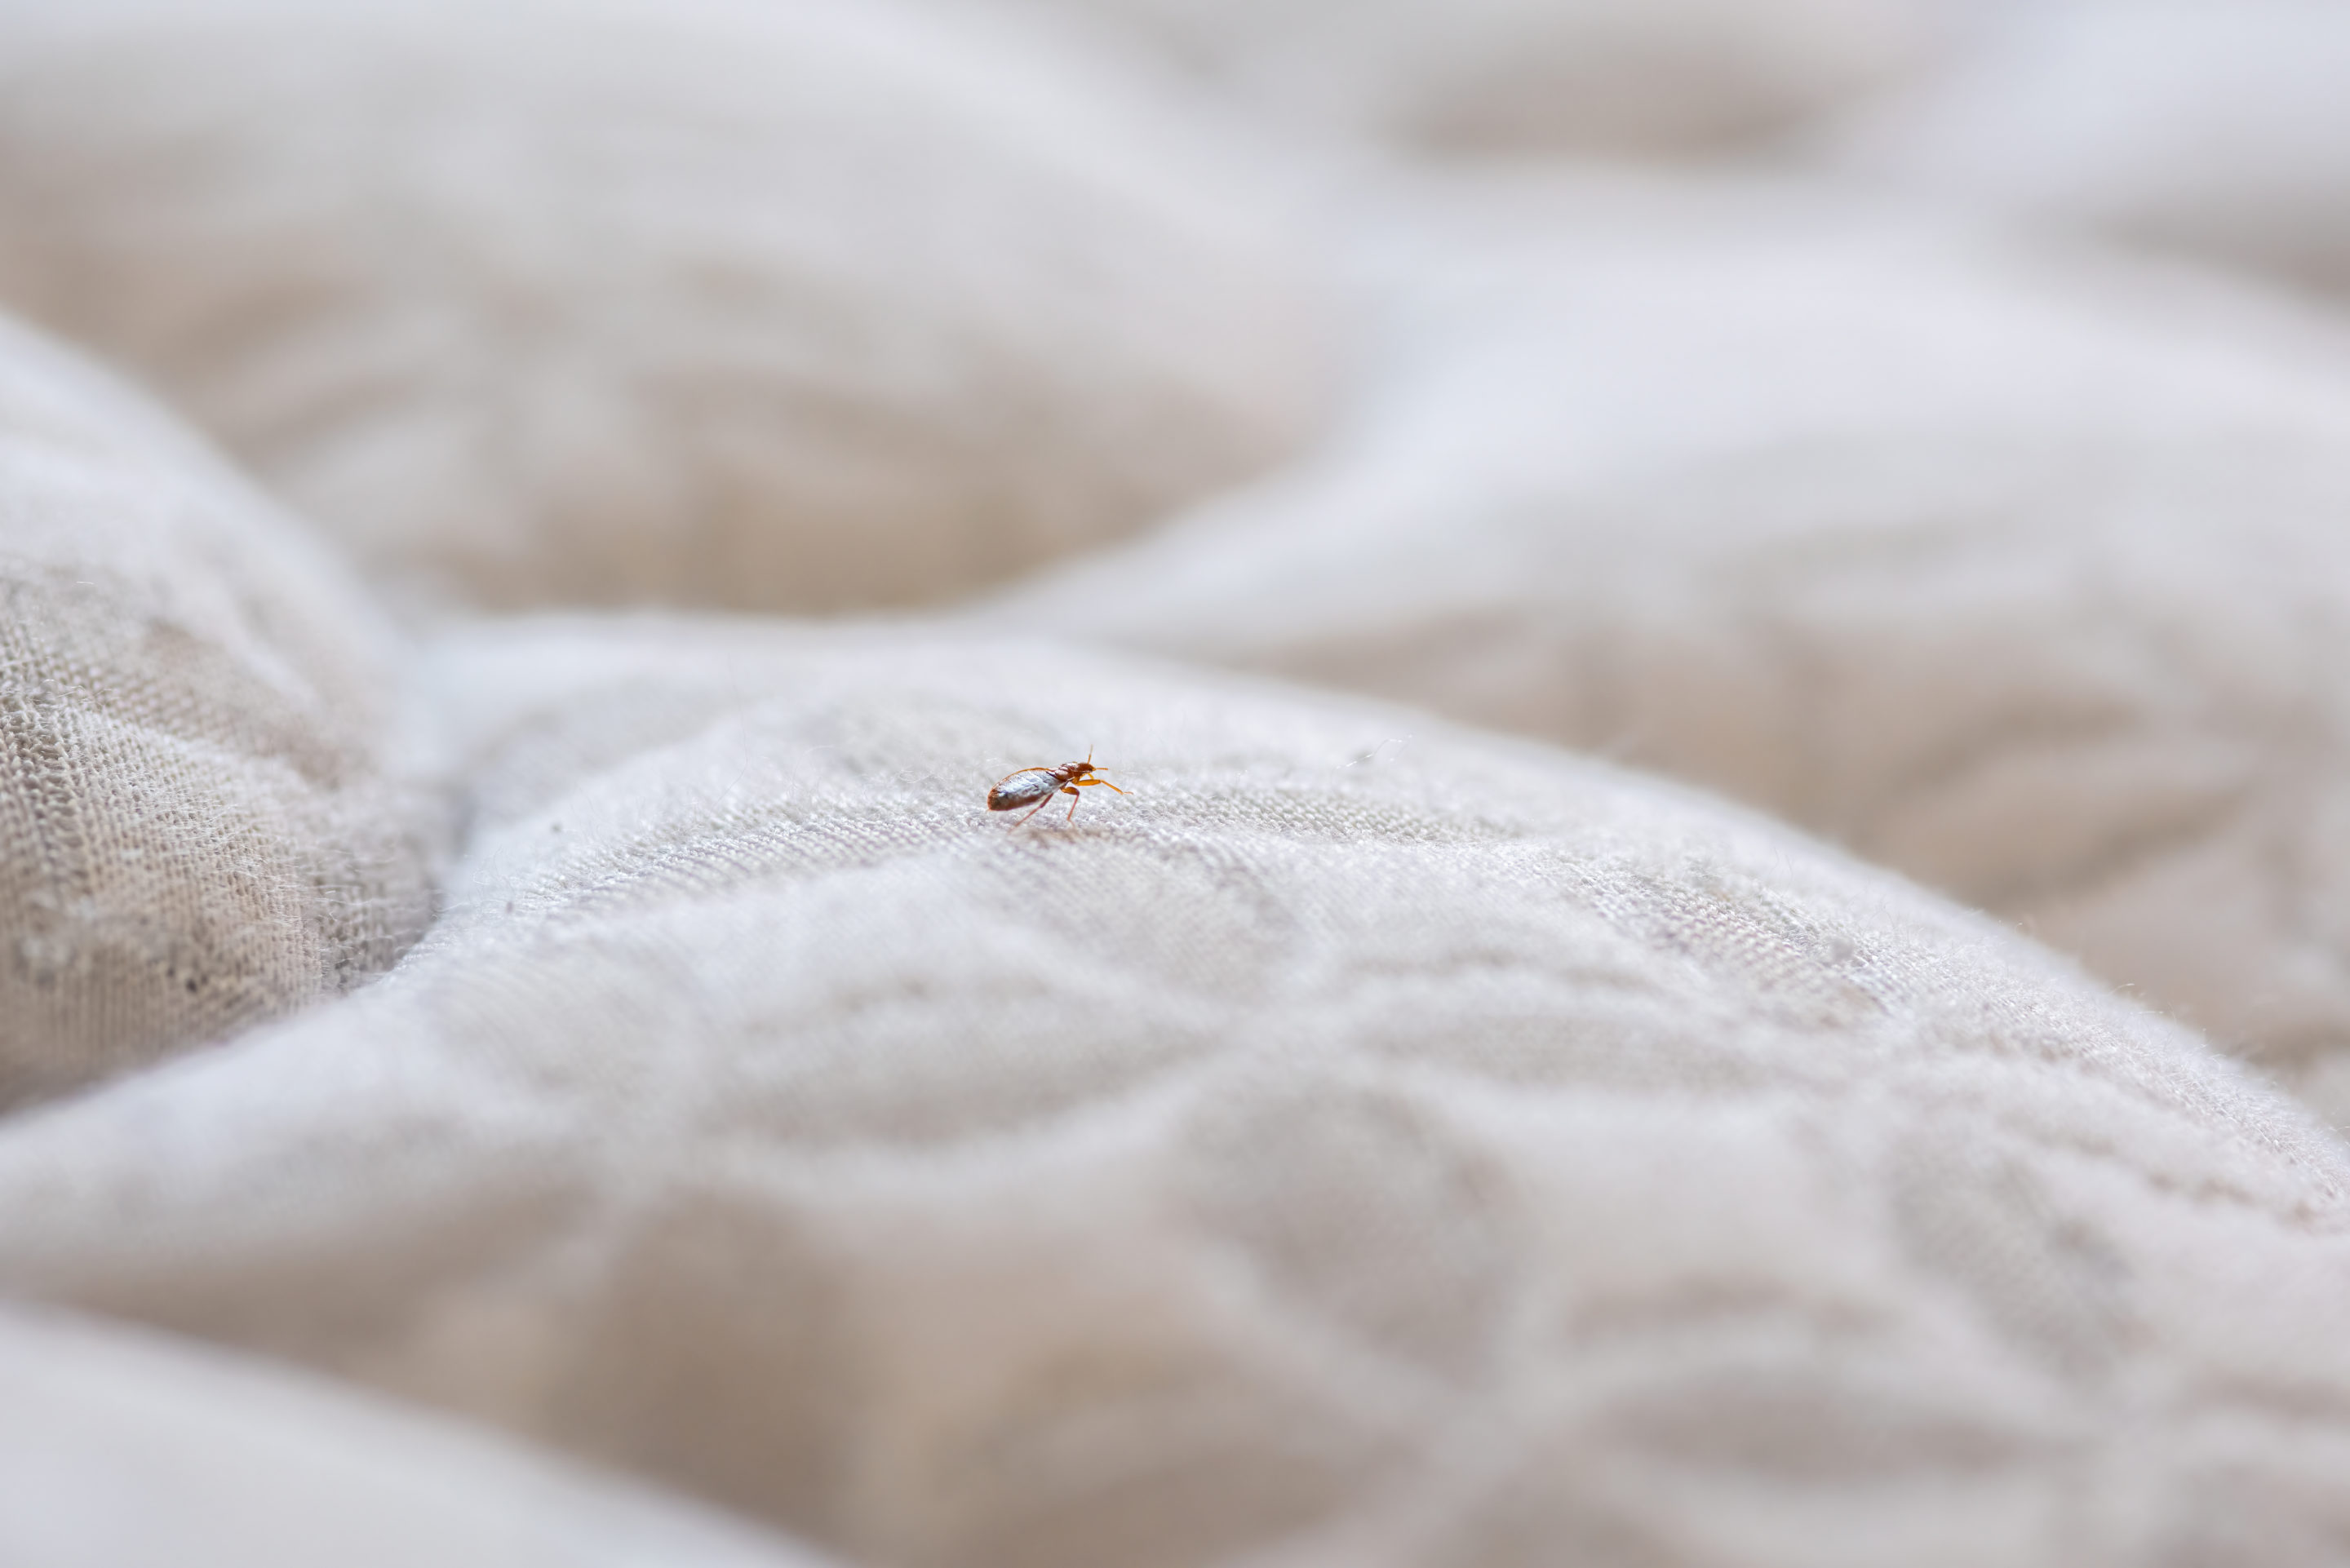 protecting yourself from bed bugs